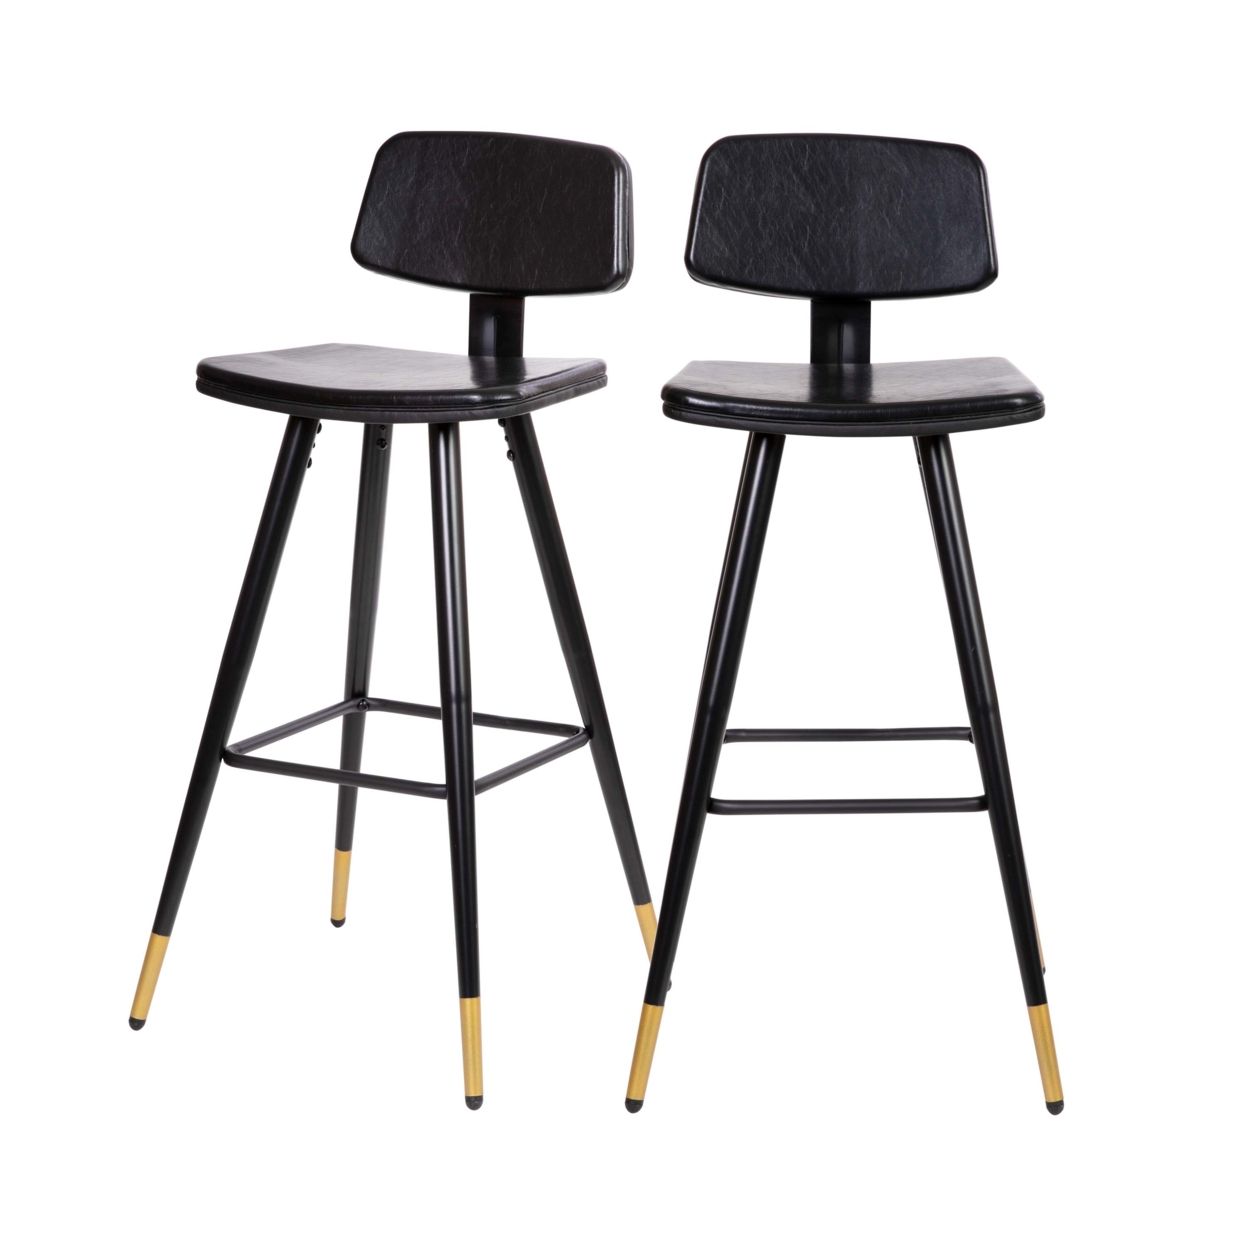 Kora Commercial Grade Low Back Barstools-Black LeatherSoft Upholstery-Black Iron Frame-Integrated Footrest-Gold Tipped Legs-Set Of 2